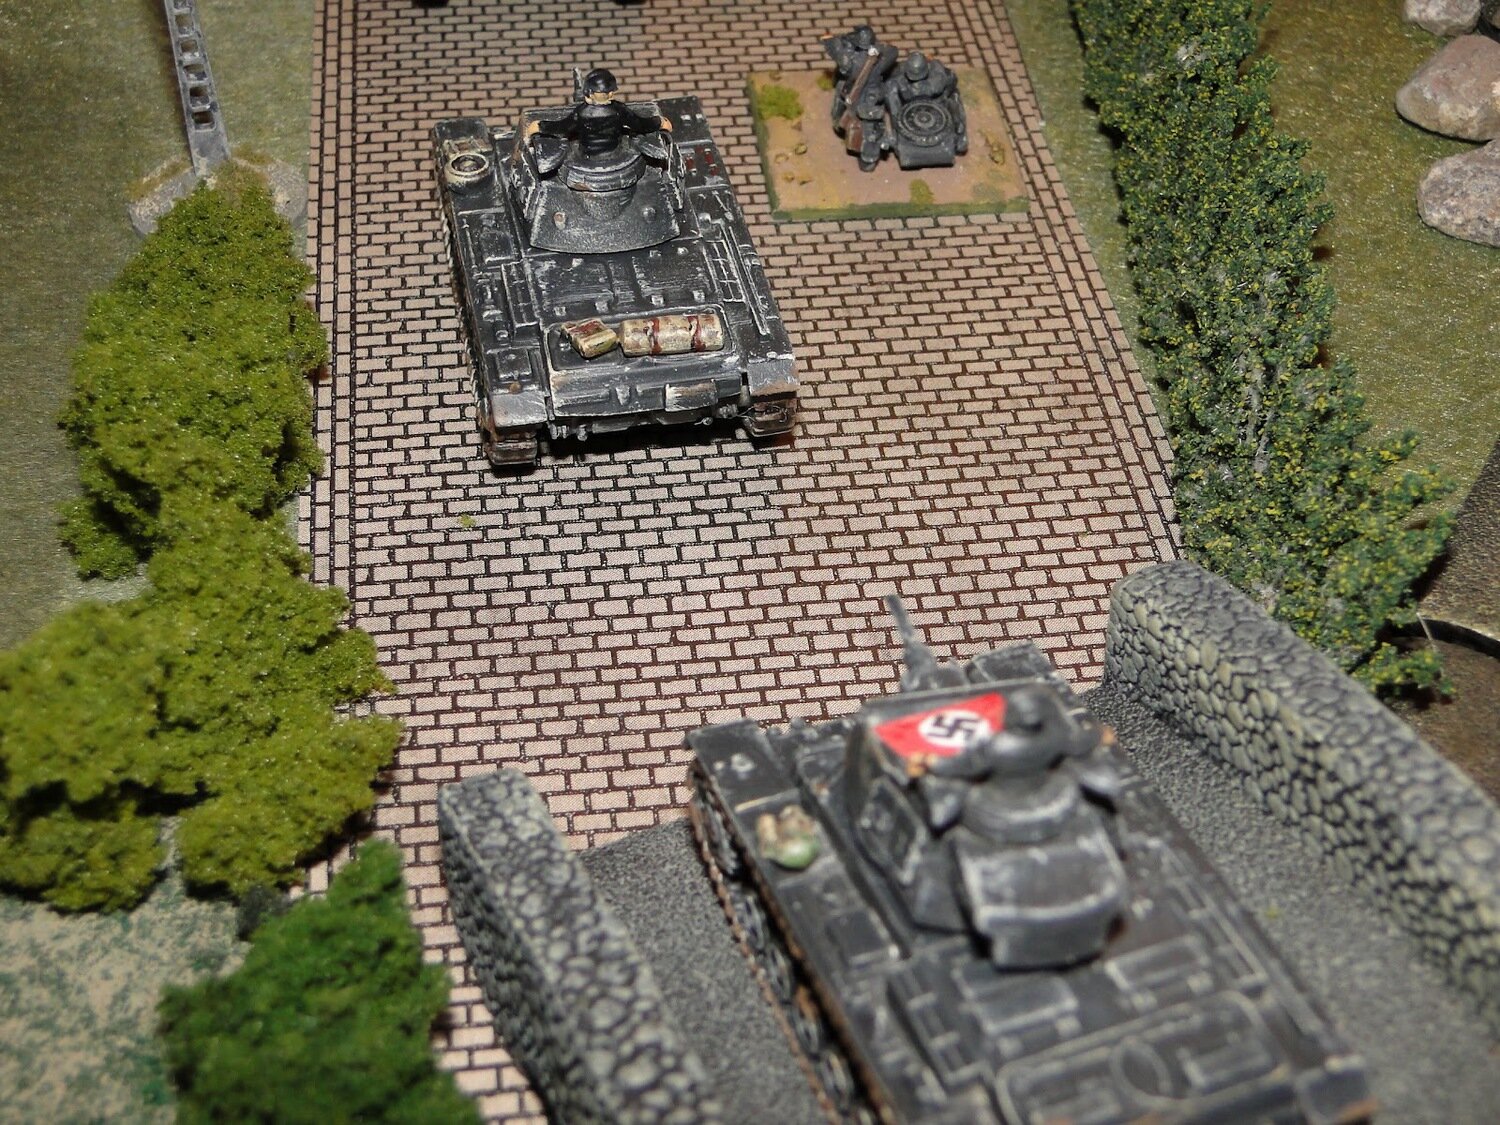 Confidently the Panzers advance along the main road